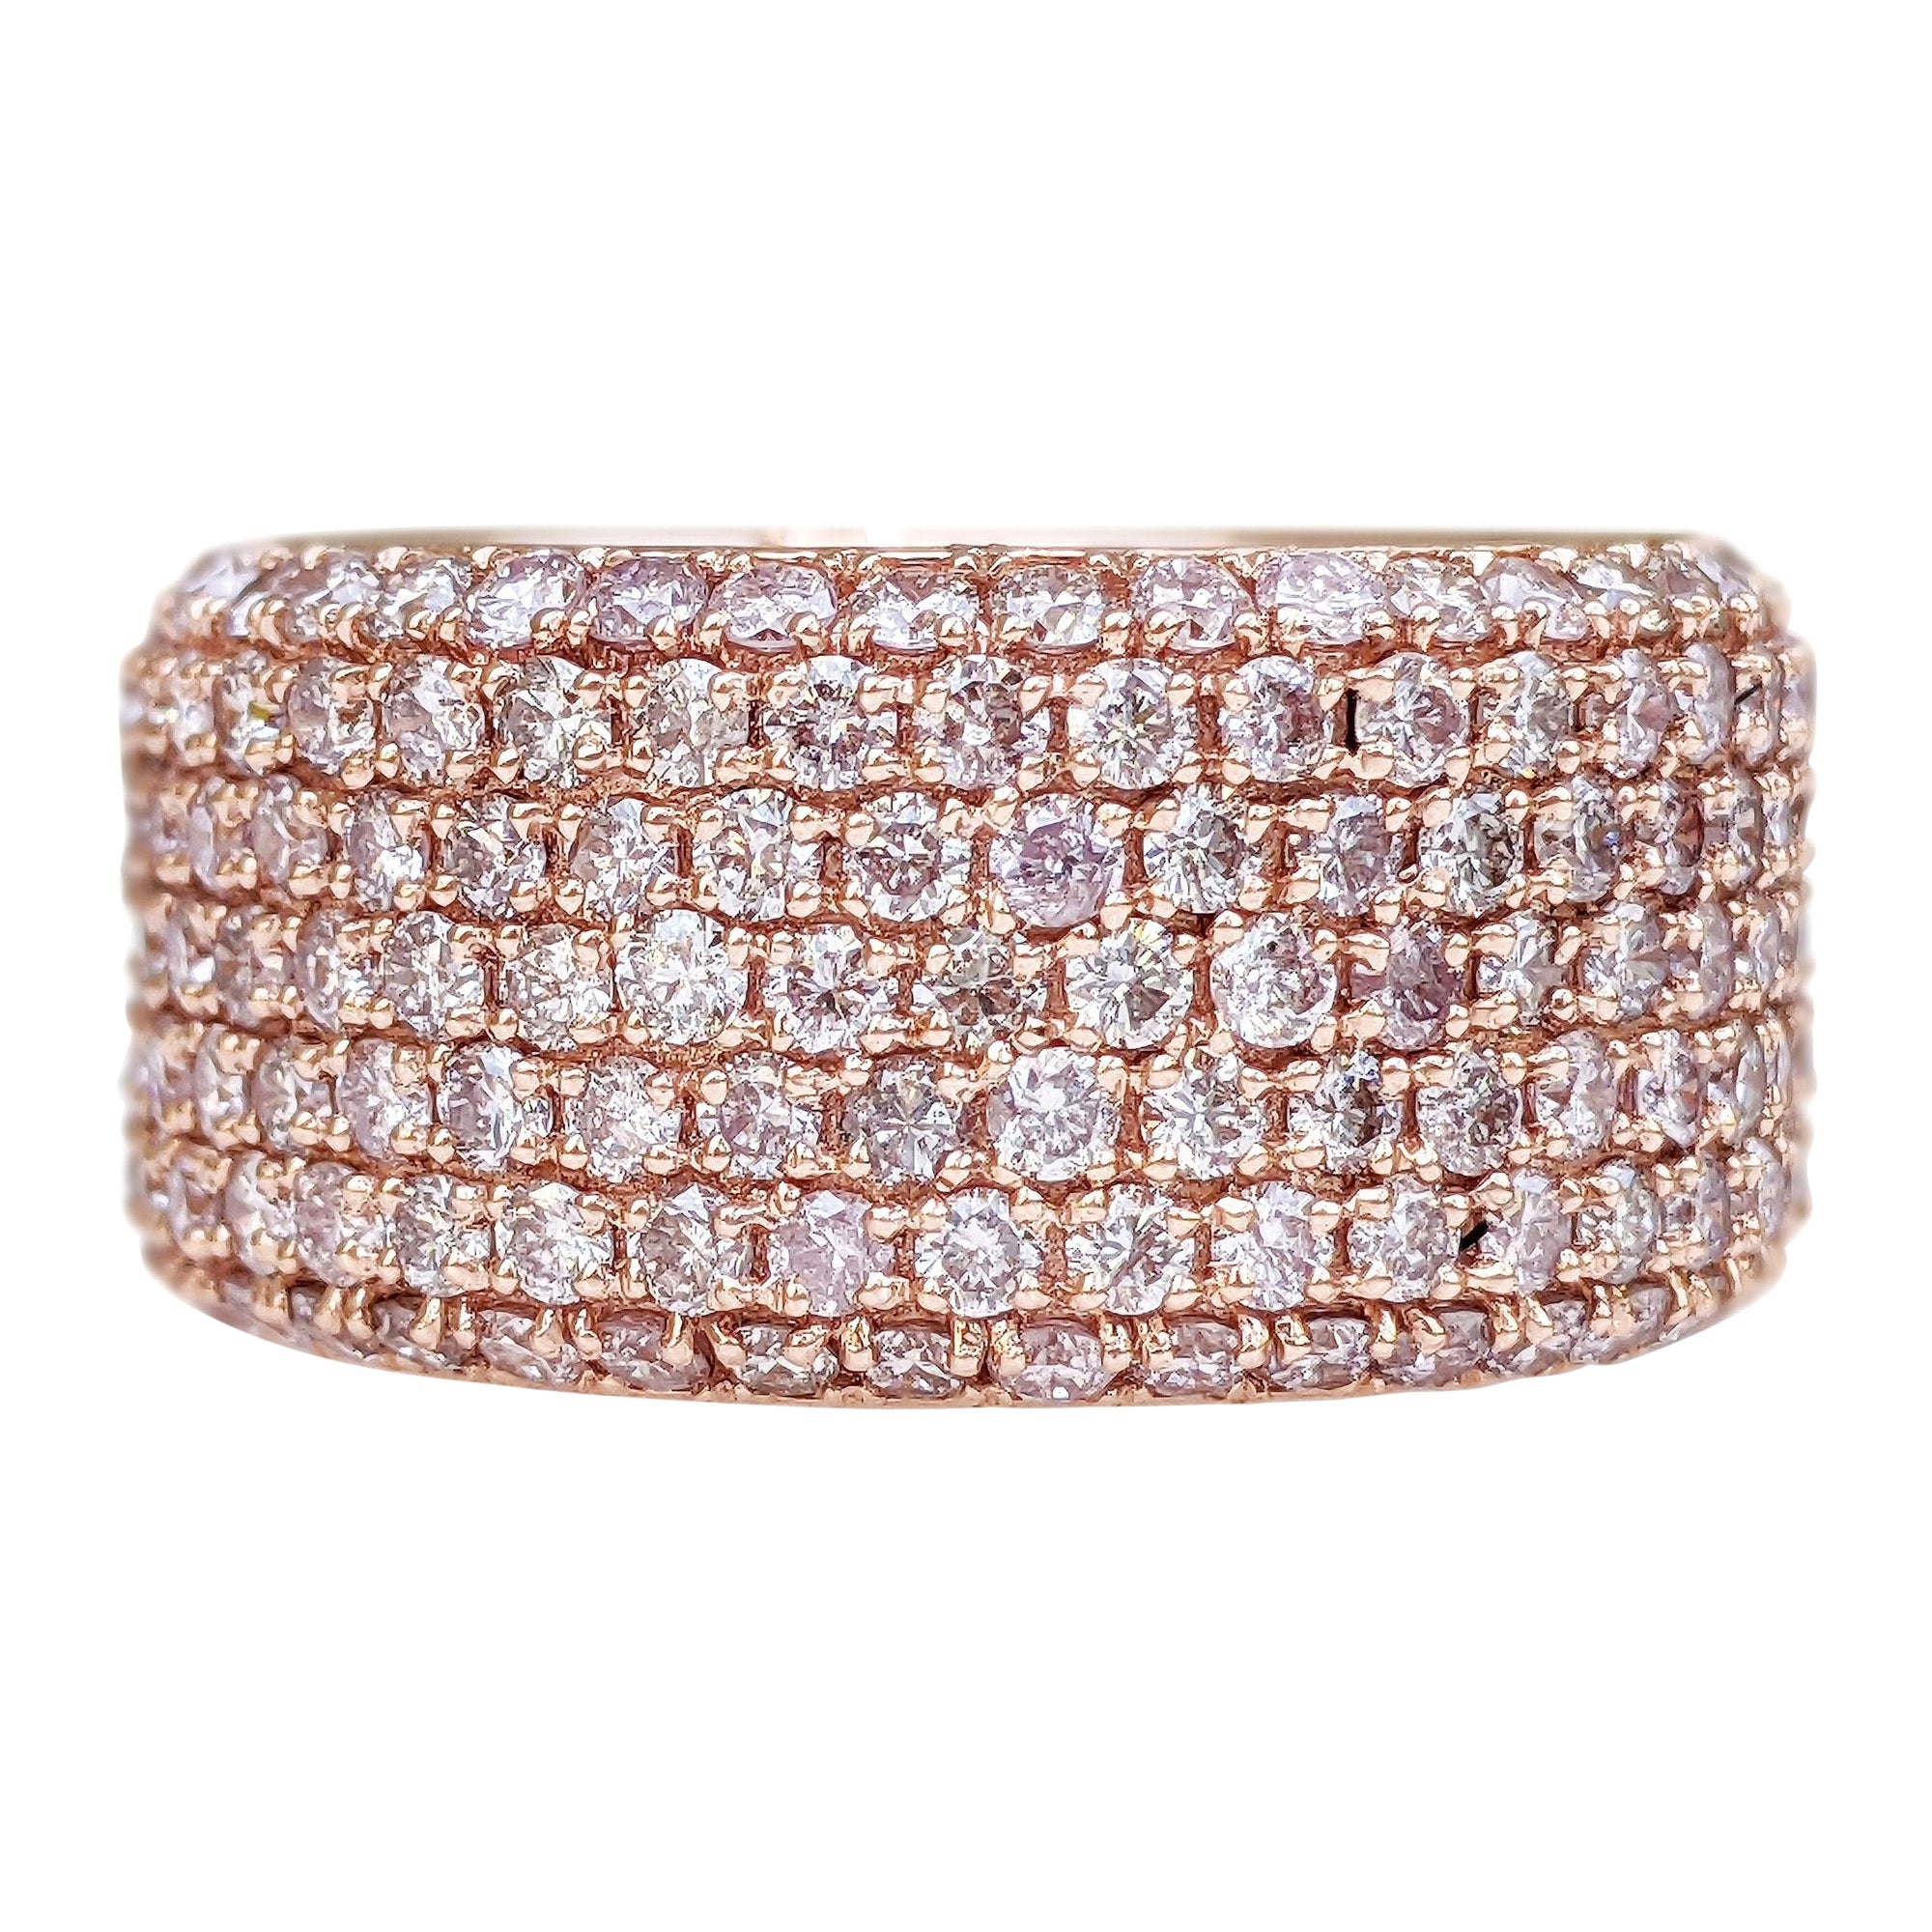 NO RESERVE! 4.30 Carat Fancy Pink Diamonds Eternity Band Pink gold - Ring For Sale